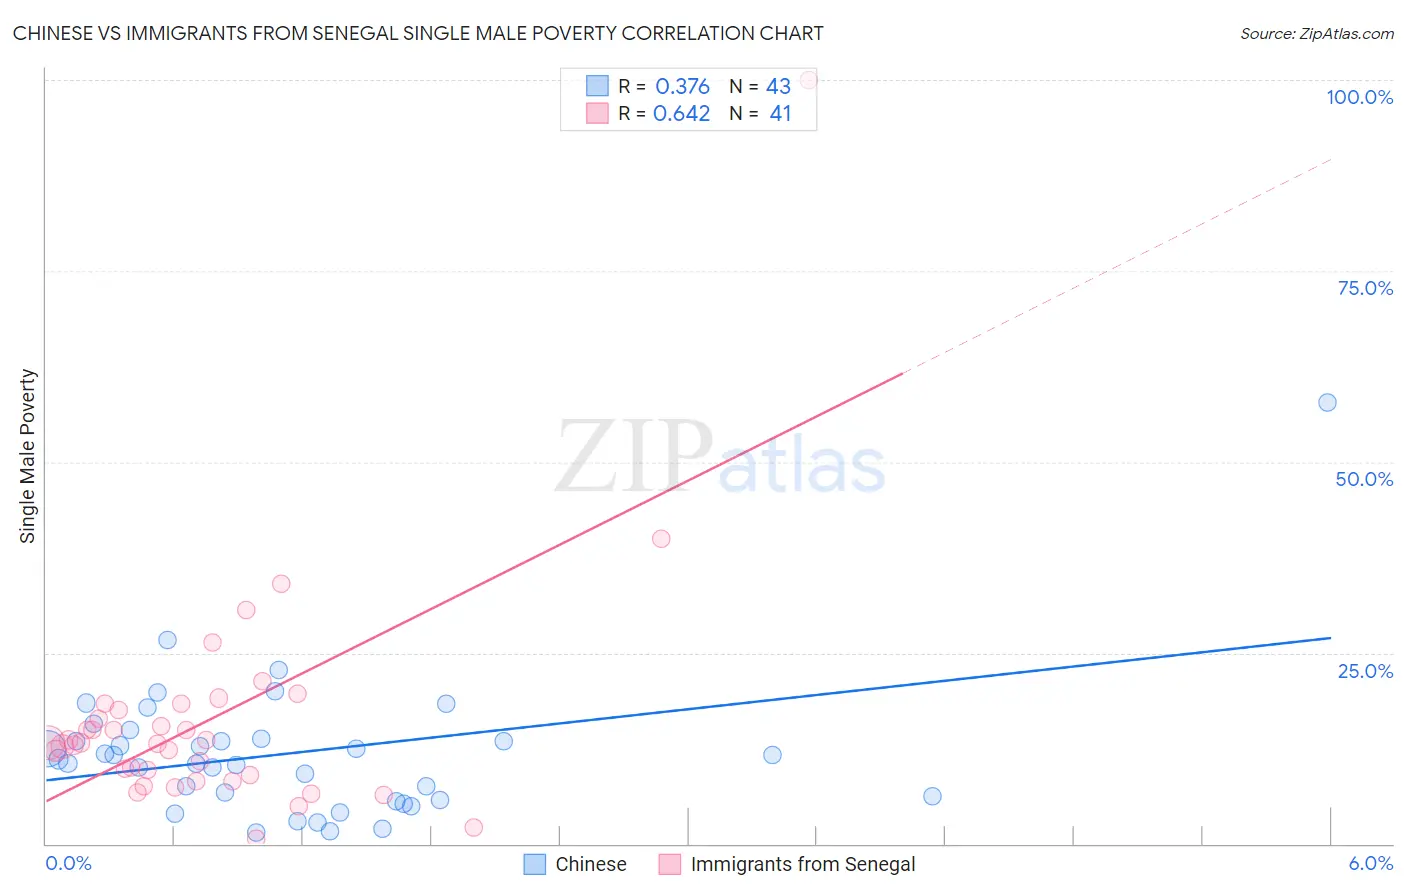 Chinese vs Immigrants from Senegal Single Male Poverty